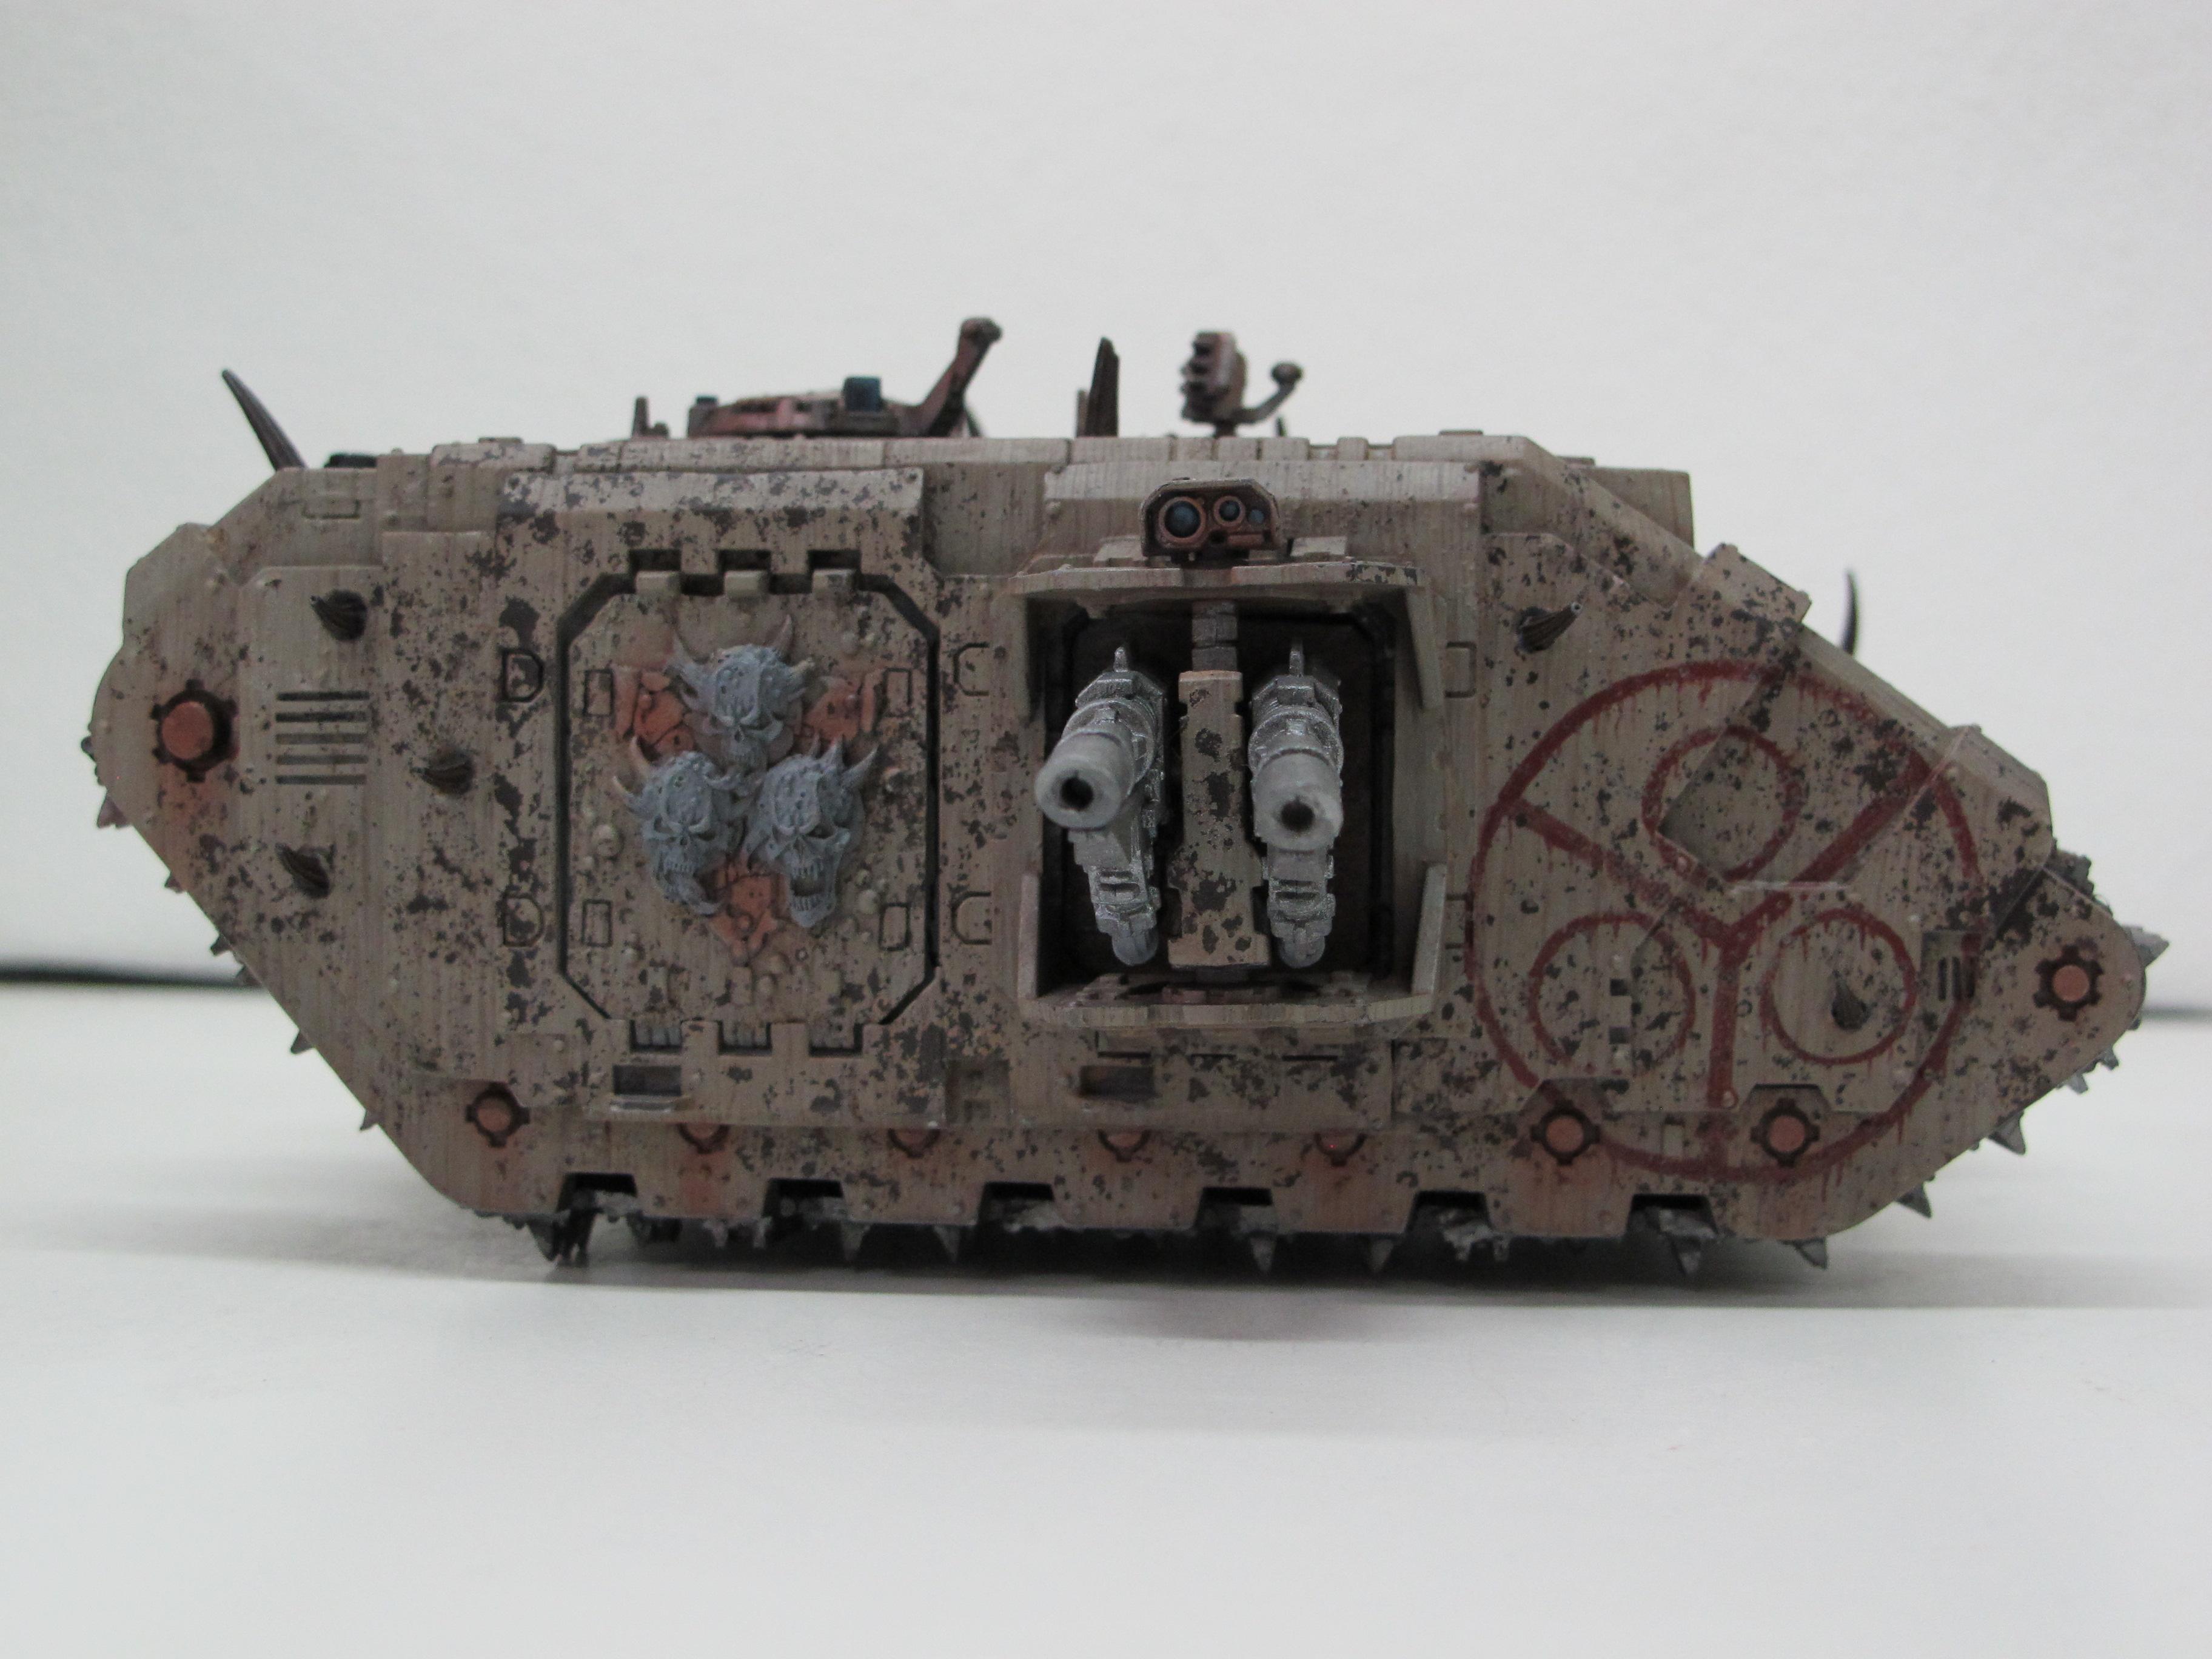 Chaos, Chaos Space Marines, Death Guard, Heretic, Land Raider, Lords Of Decay, Nurgle, Plague Marines, Renegade, Rust, Vraks